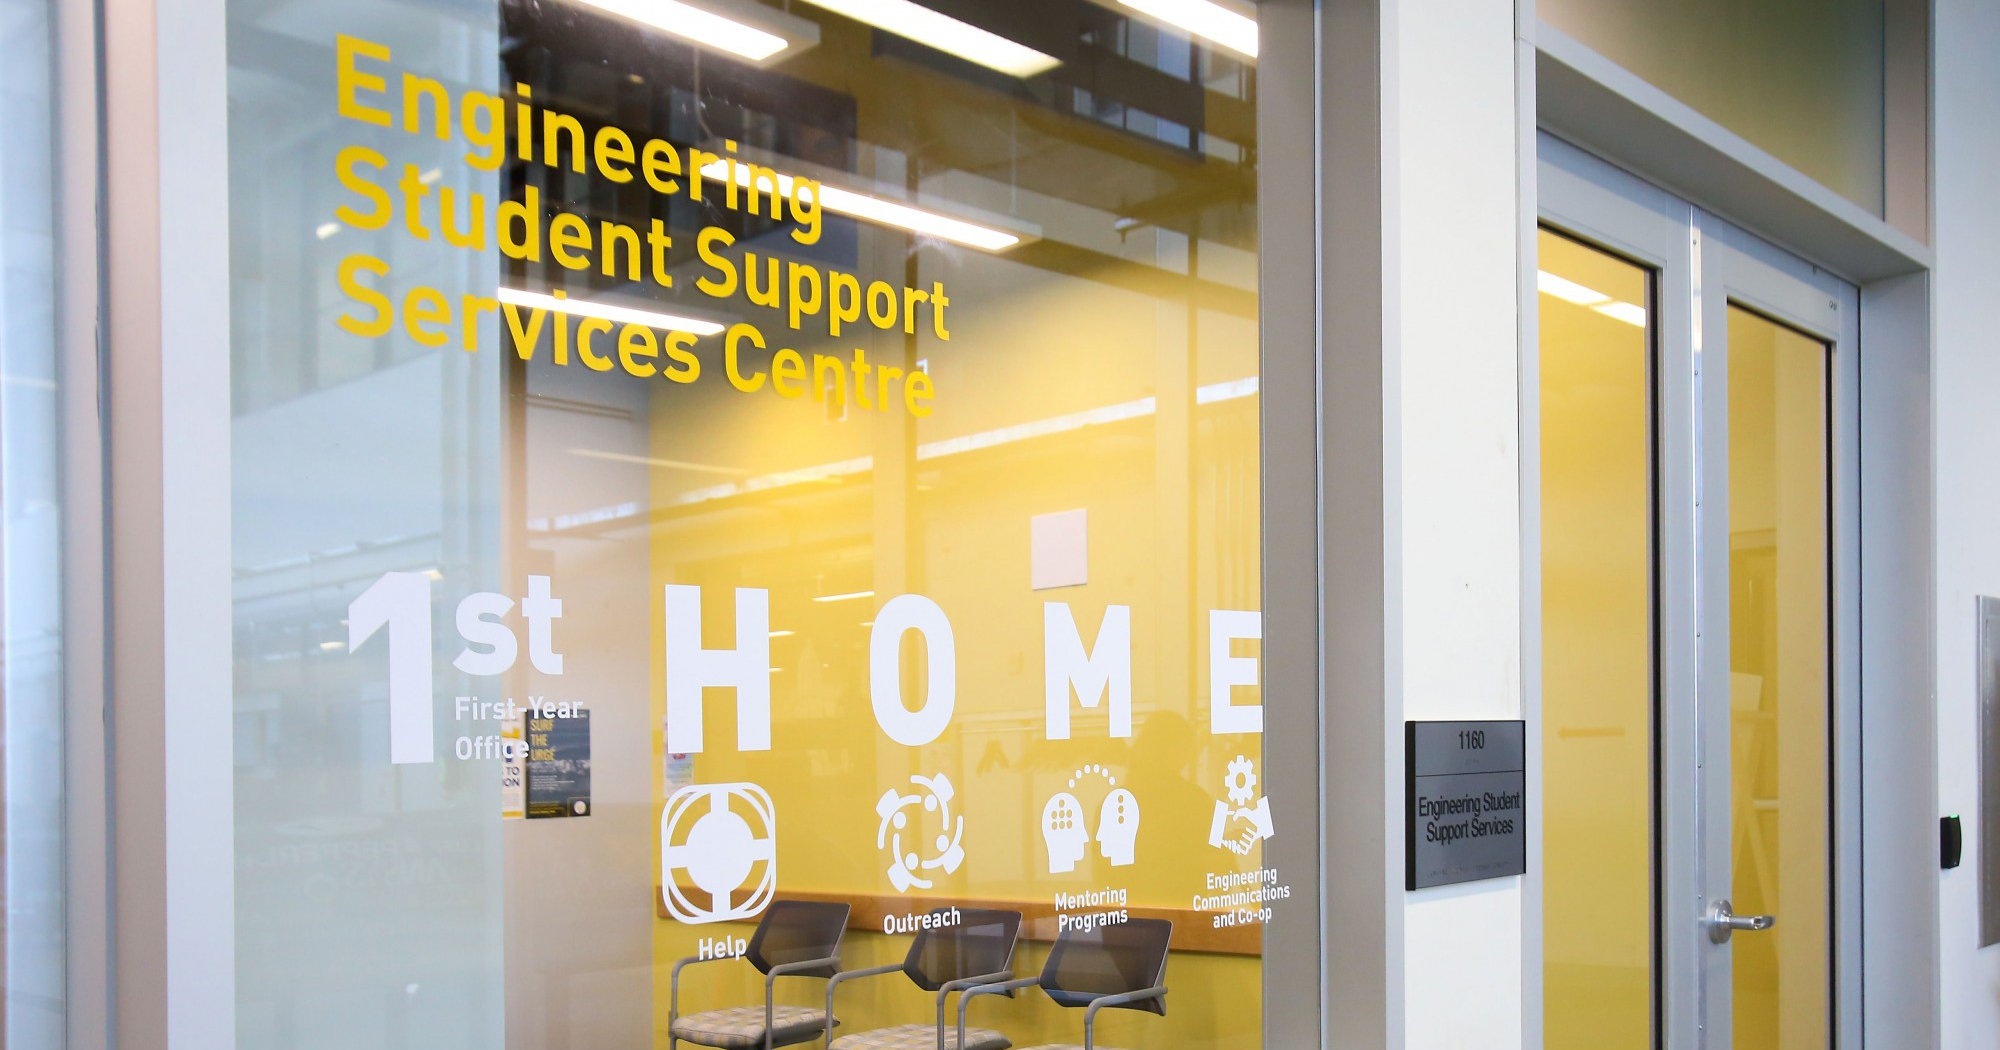 Window of Engineering Student Support Office